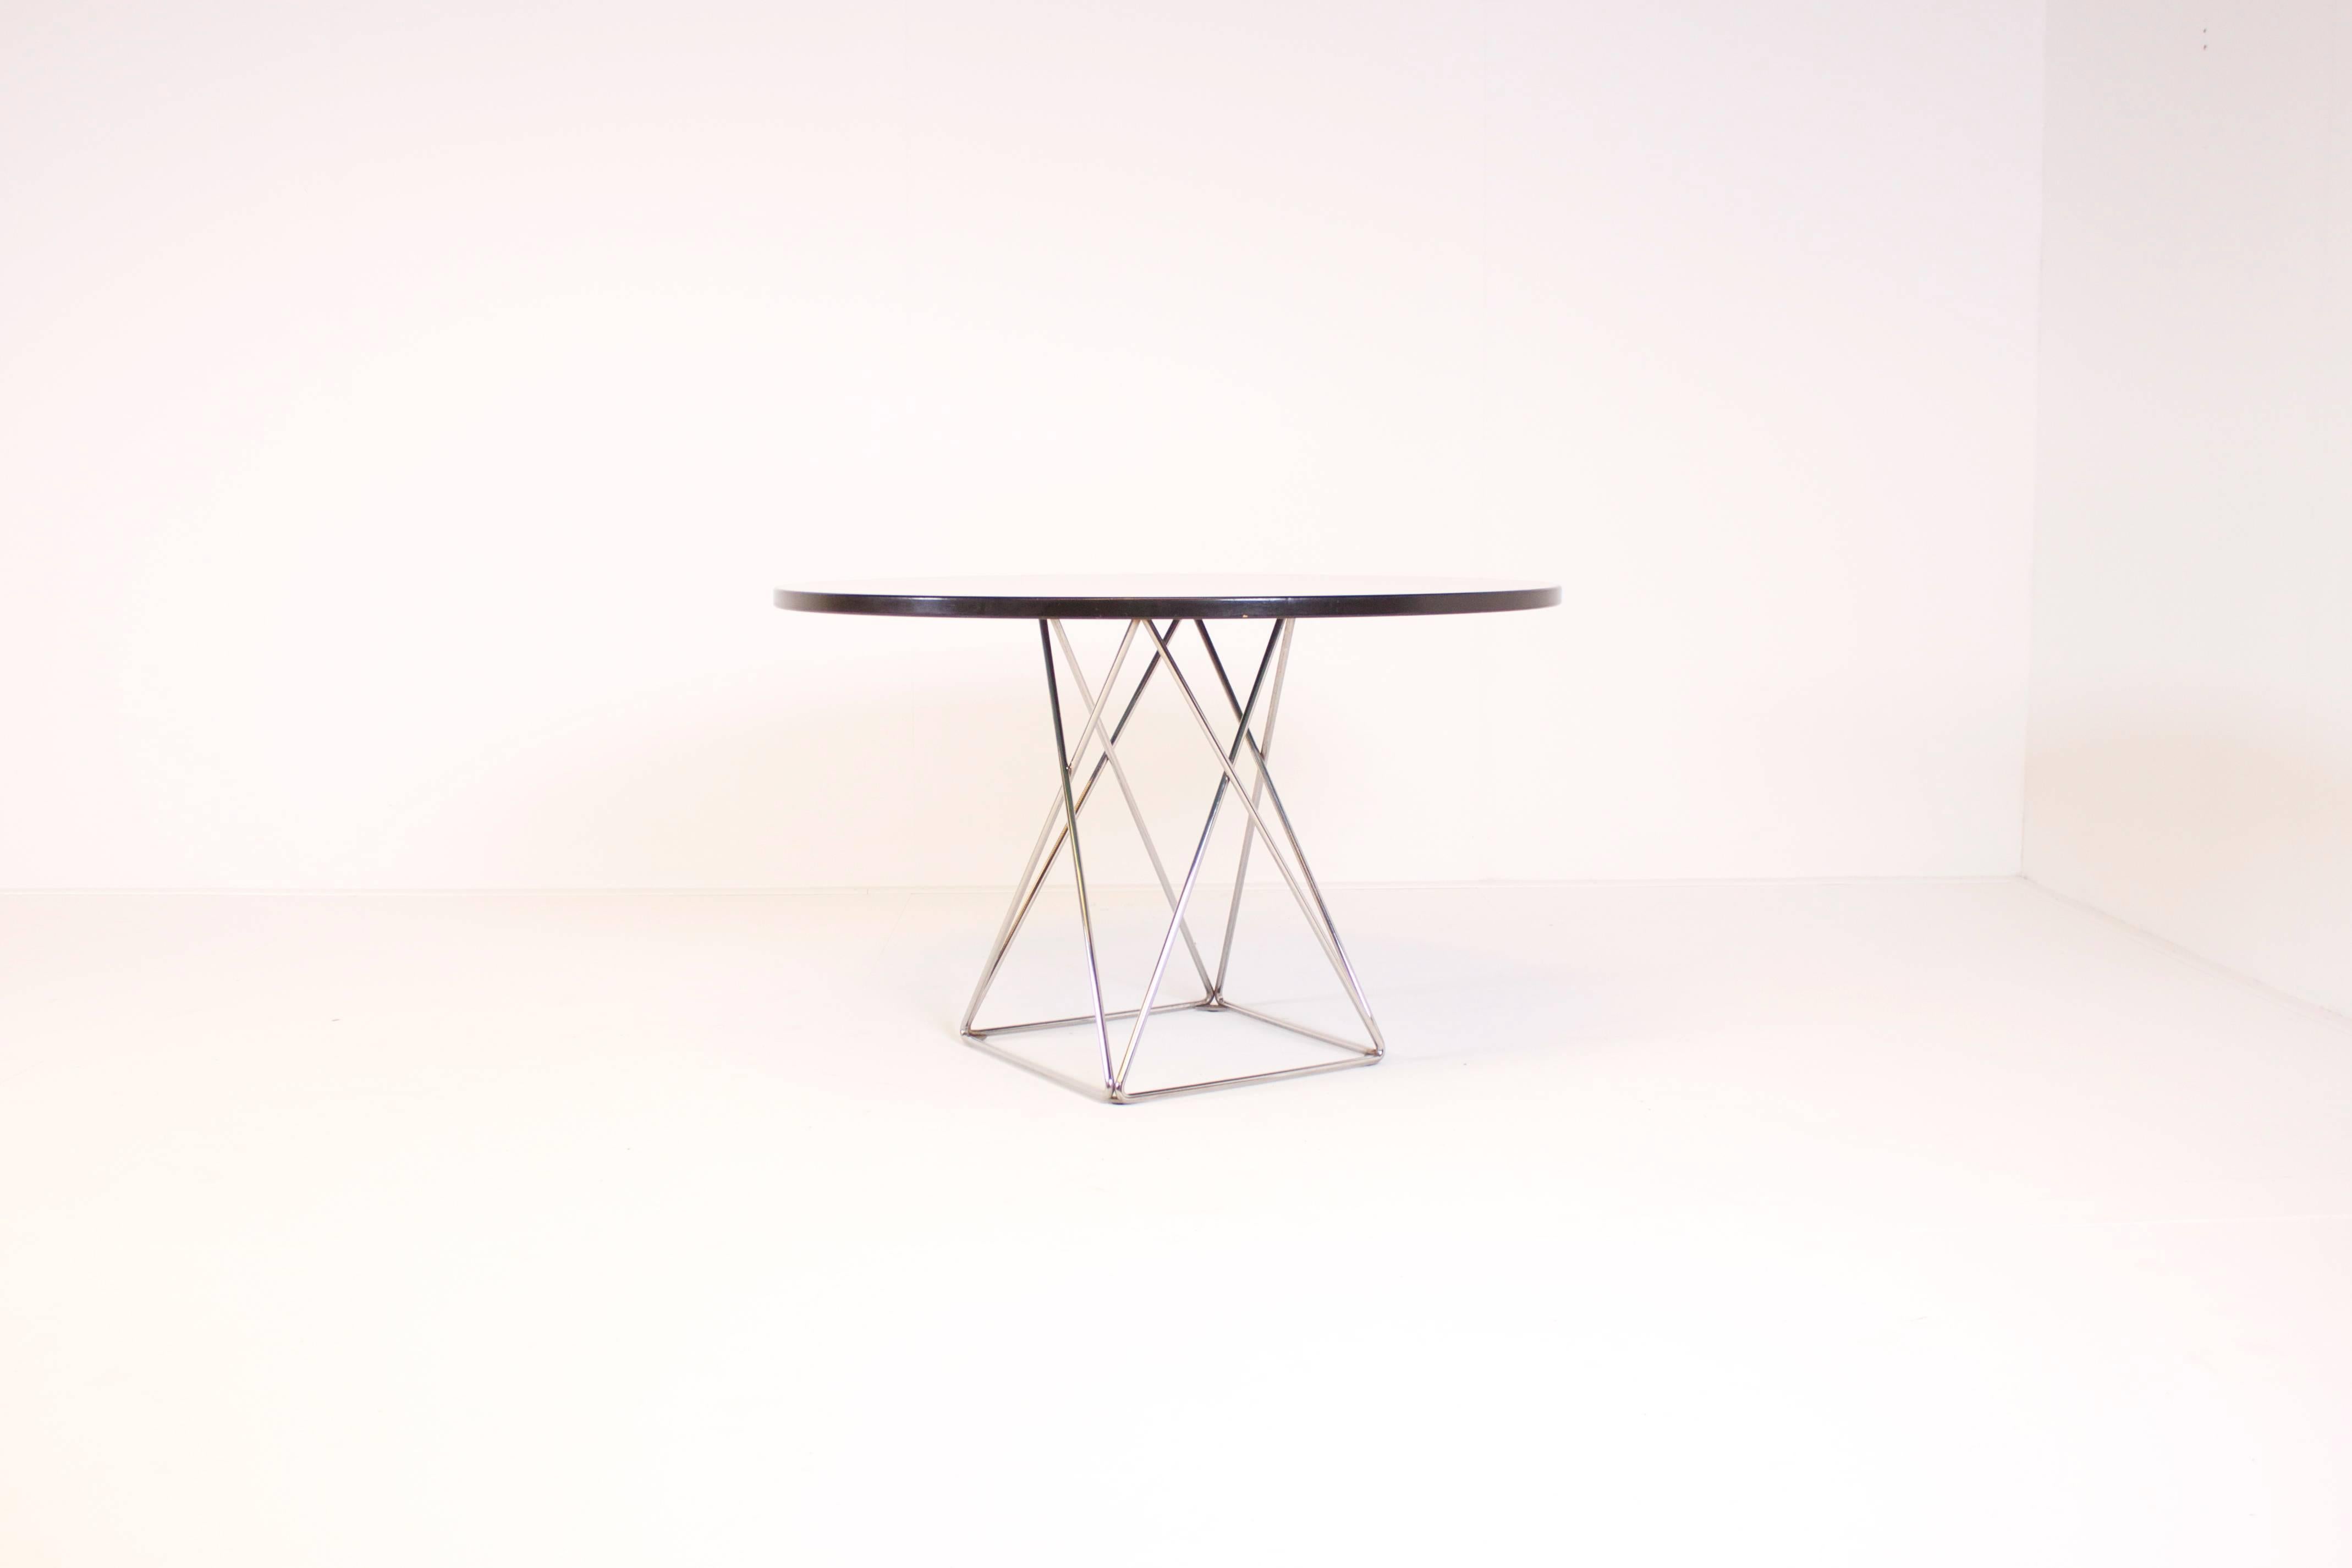 Very nice round dining table by Thonet. 

Marked with manufacturers label.

Chromed metal Eiffel base. 

Light grey formica top with a black lacquered wooden rim.

Goes very well with Charles & Ray Eames plastic chairs with Eiffel base.

From